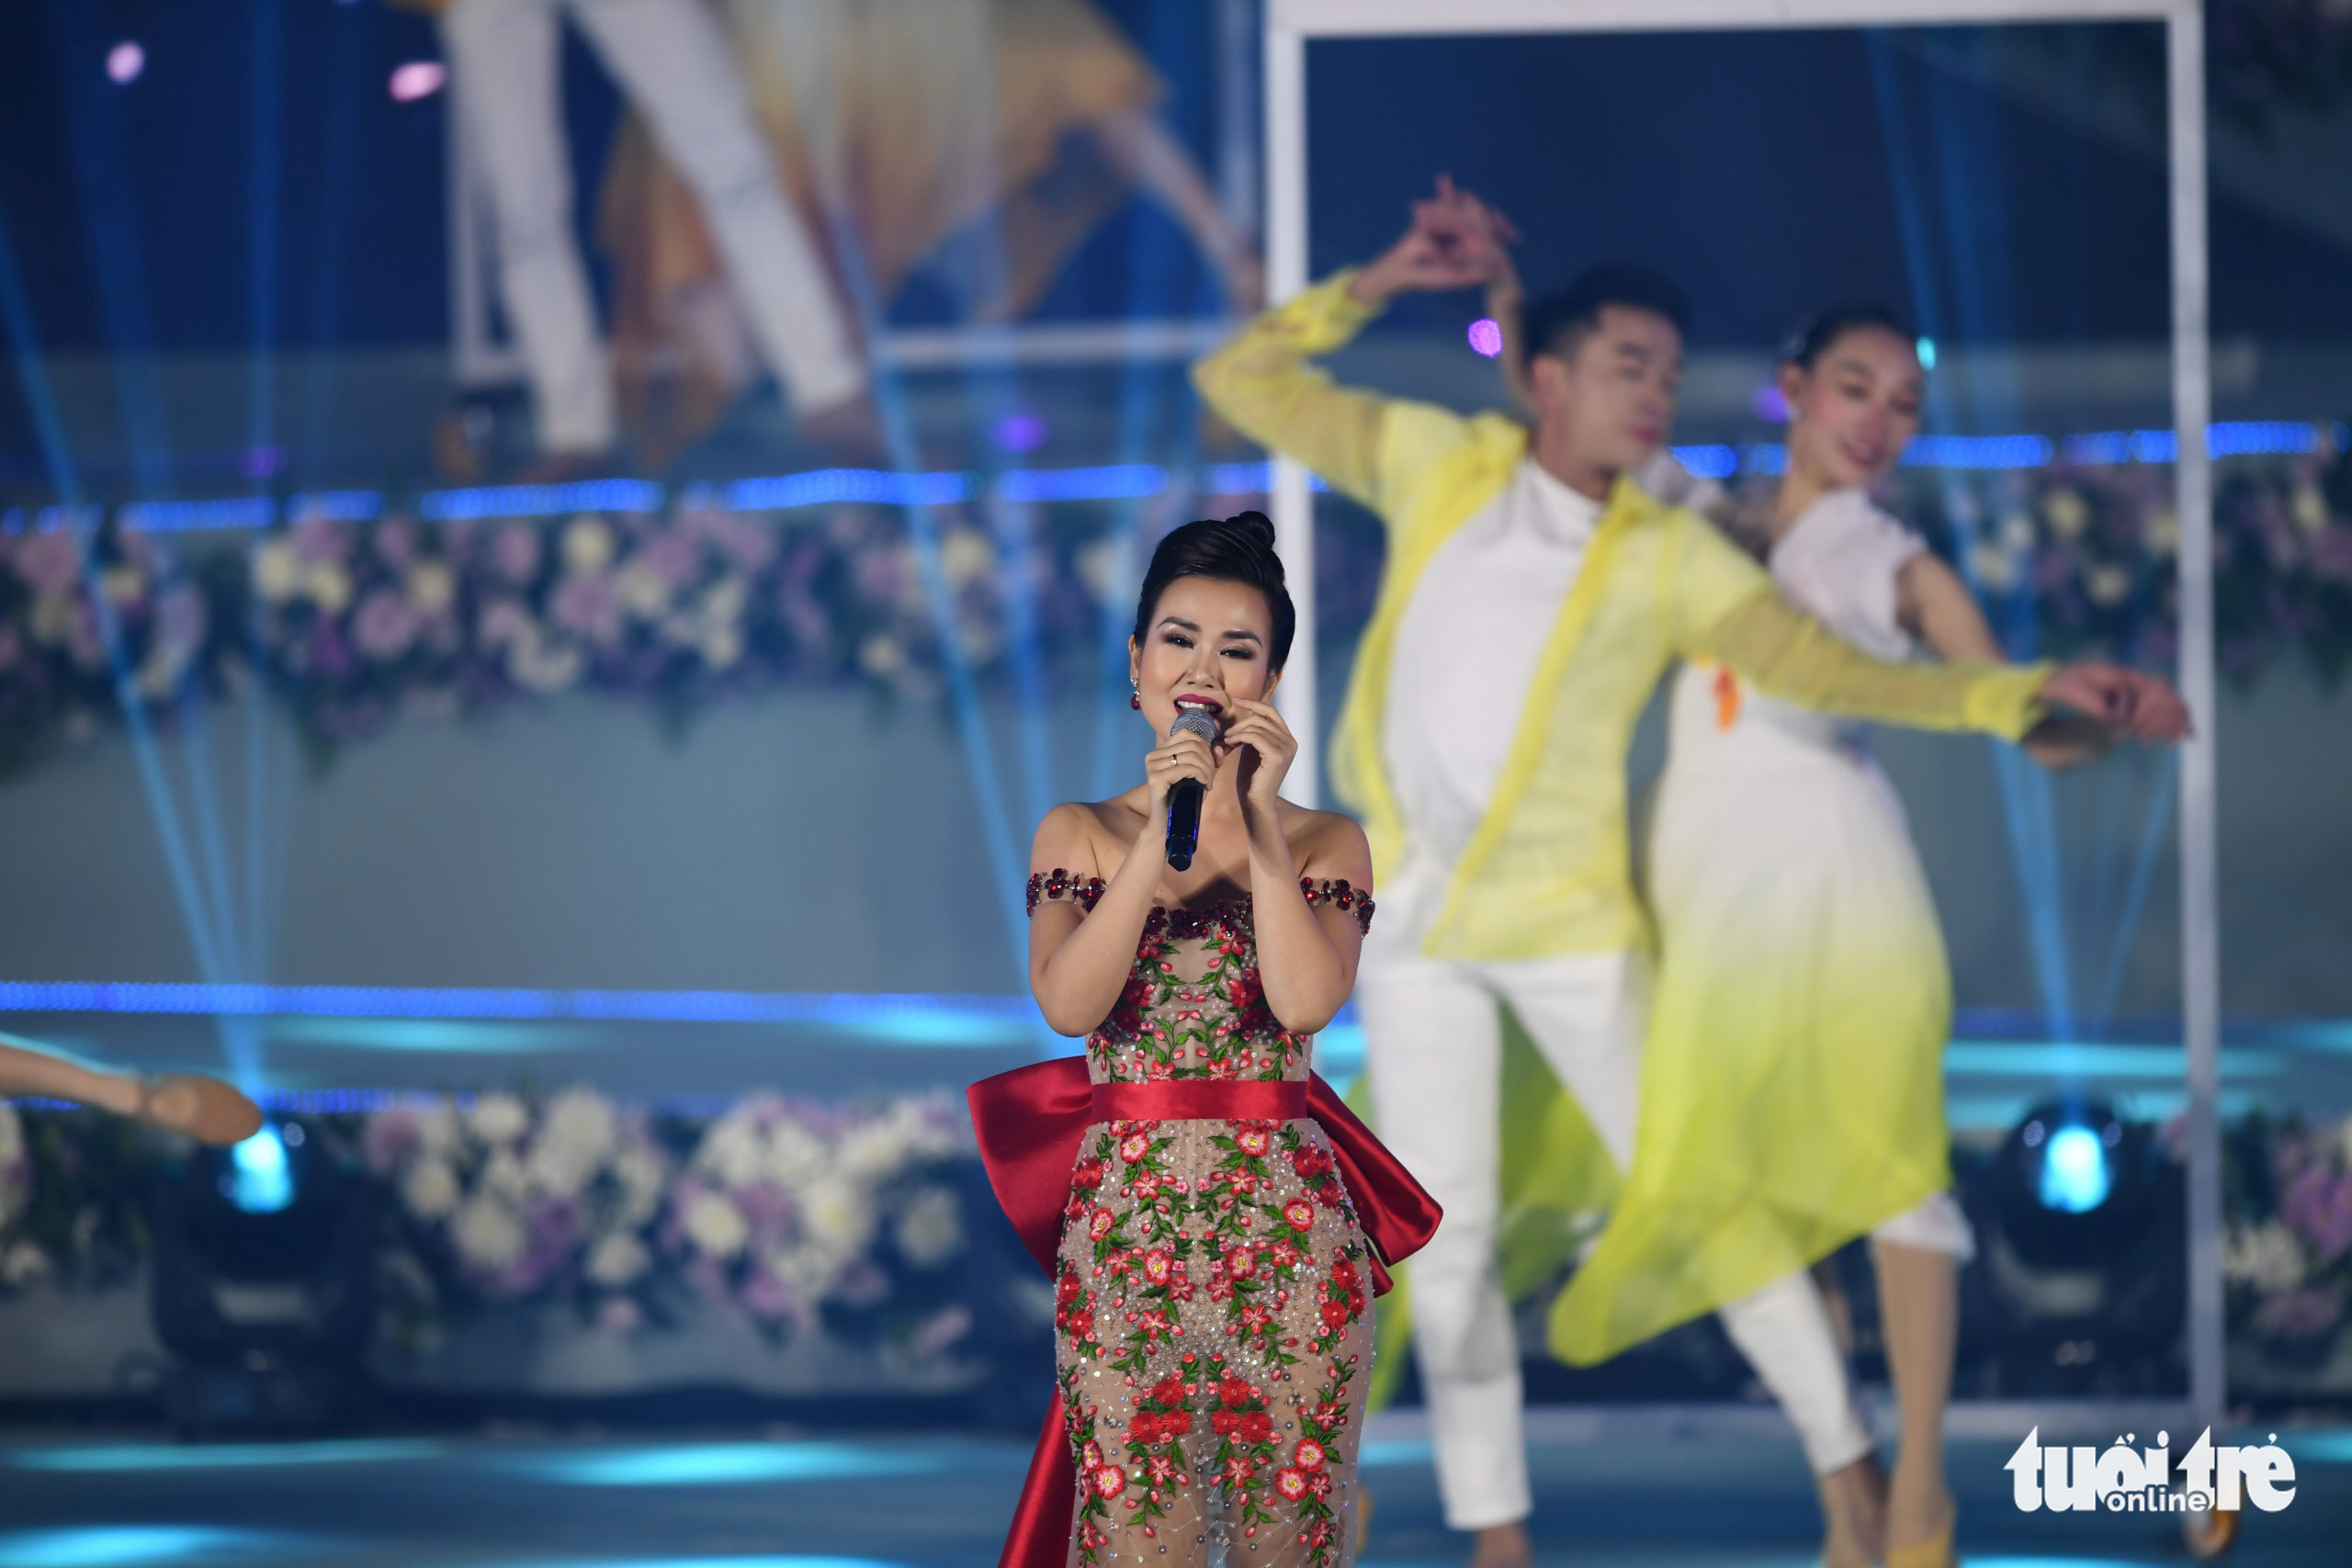 Singer Vo Ha Tram performs at the opening ceremony of the Da Lat Flower Festival 2022 in Da Lat City, Lam Dong Province, Vietnam, December 18, 2022. Photo: M.V. / Tuoi Tre